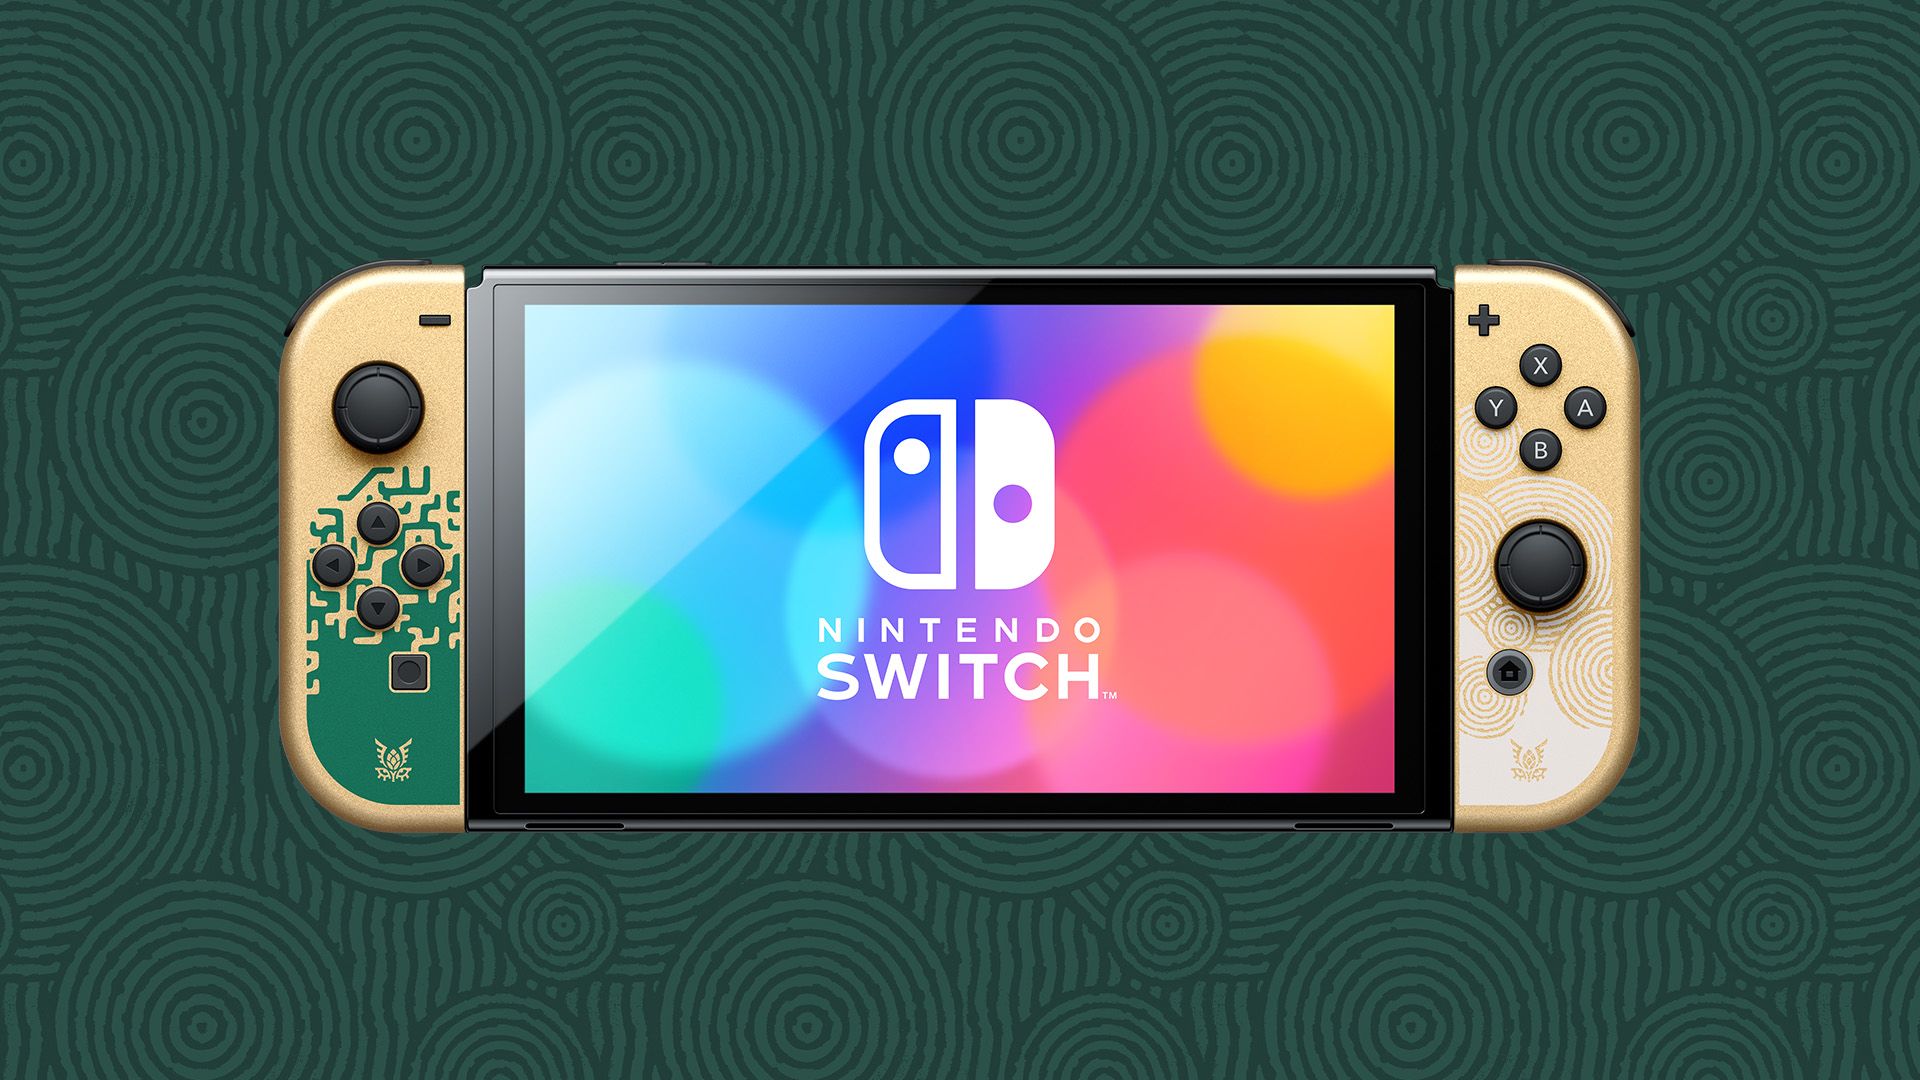 The Nintendo Switch OLED is nice, but I want a Switch Pro for Zelda